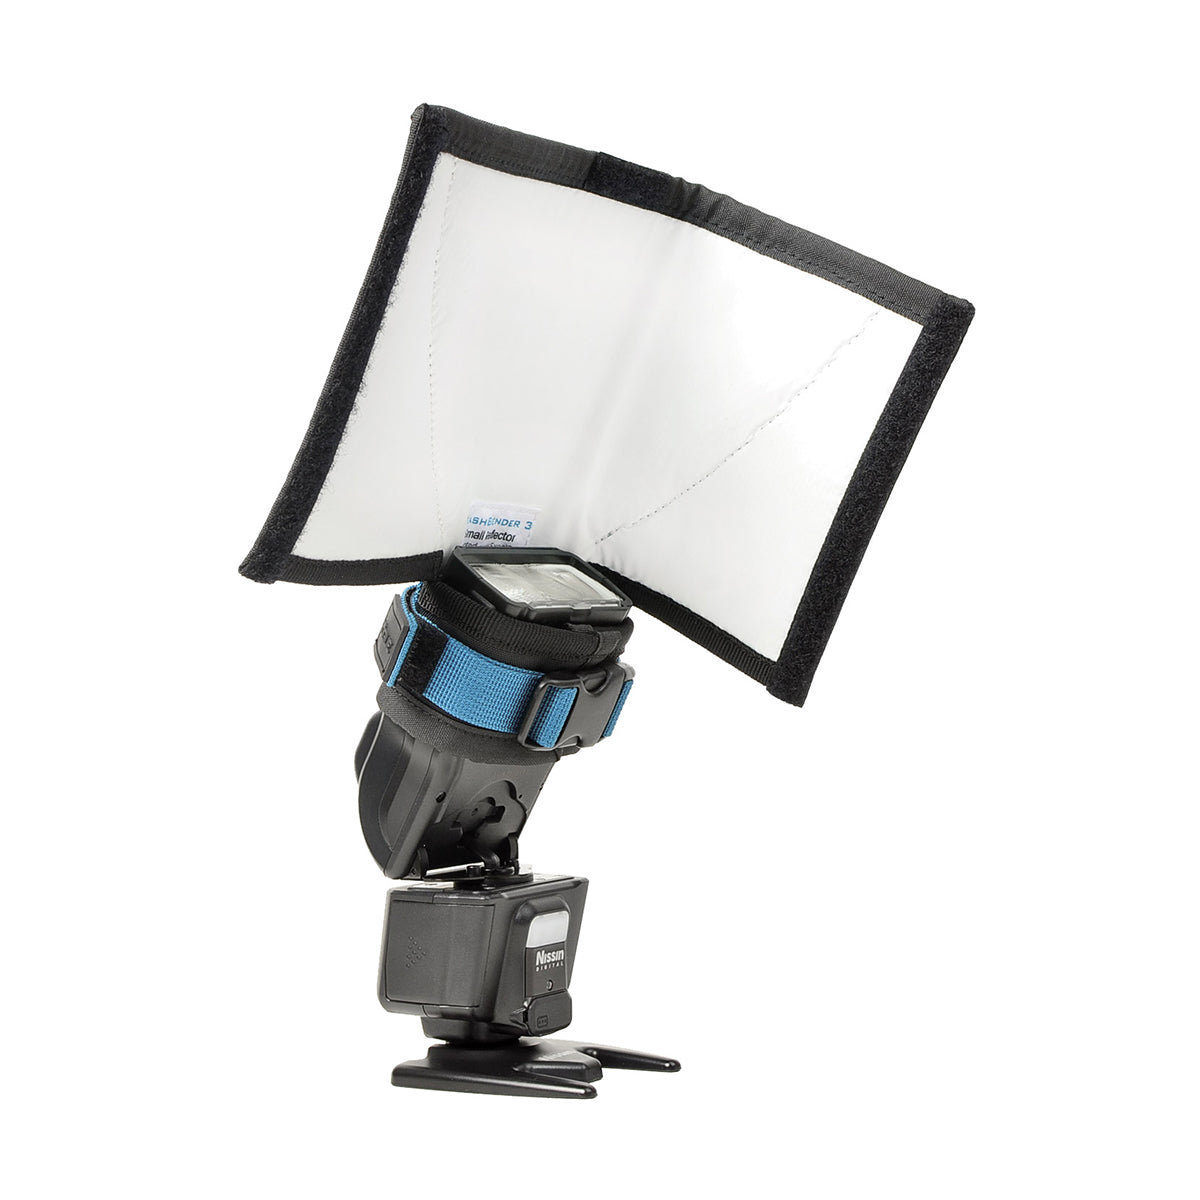 Rogue FlashBender 3 - Small Positionable Reflector